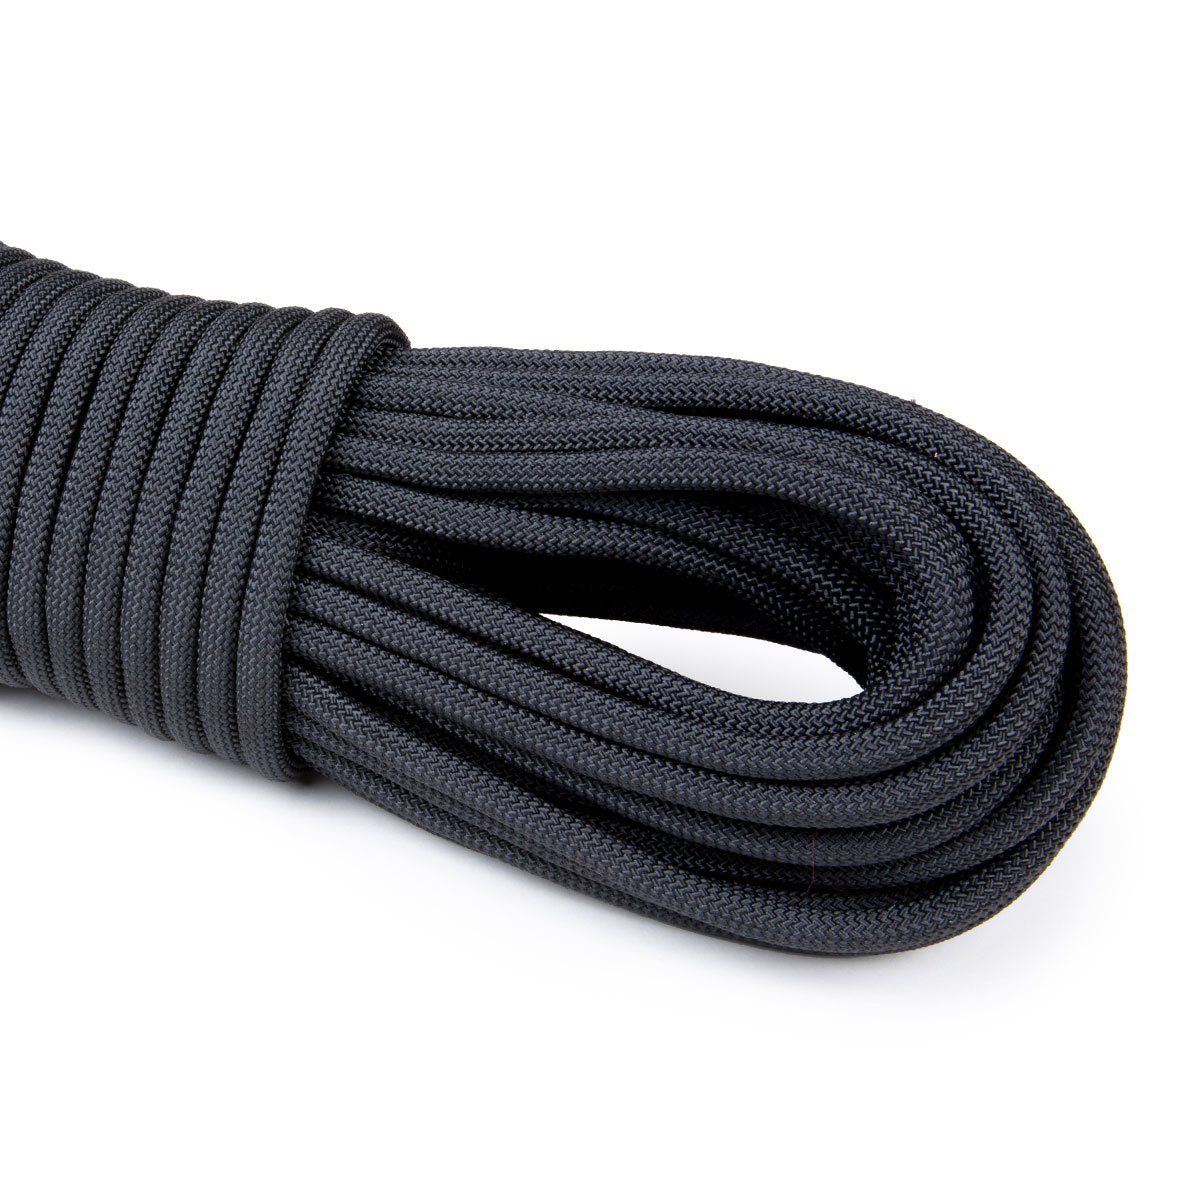 Atwood Rope MFG 3/8” inch 50ft, 100ft | Braided Utility Rope